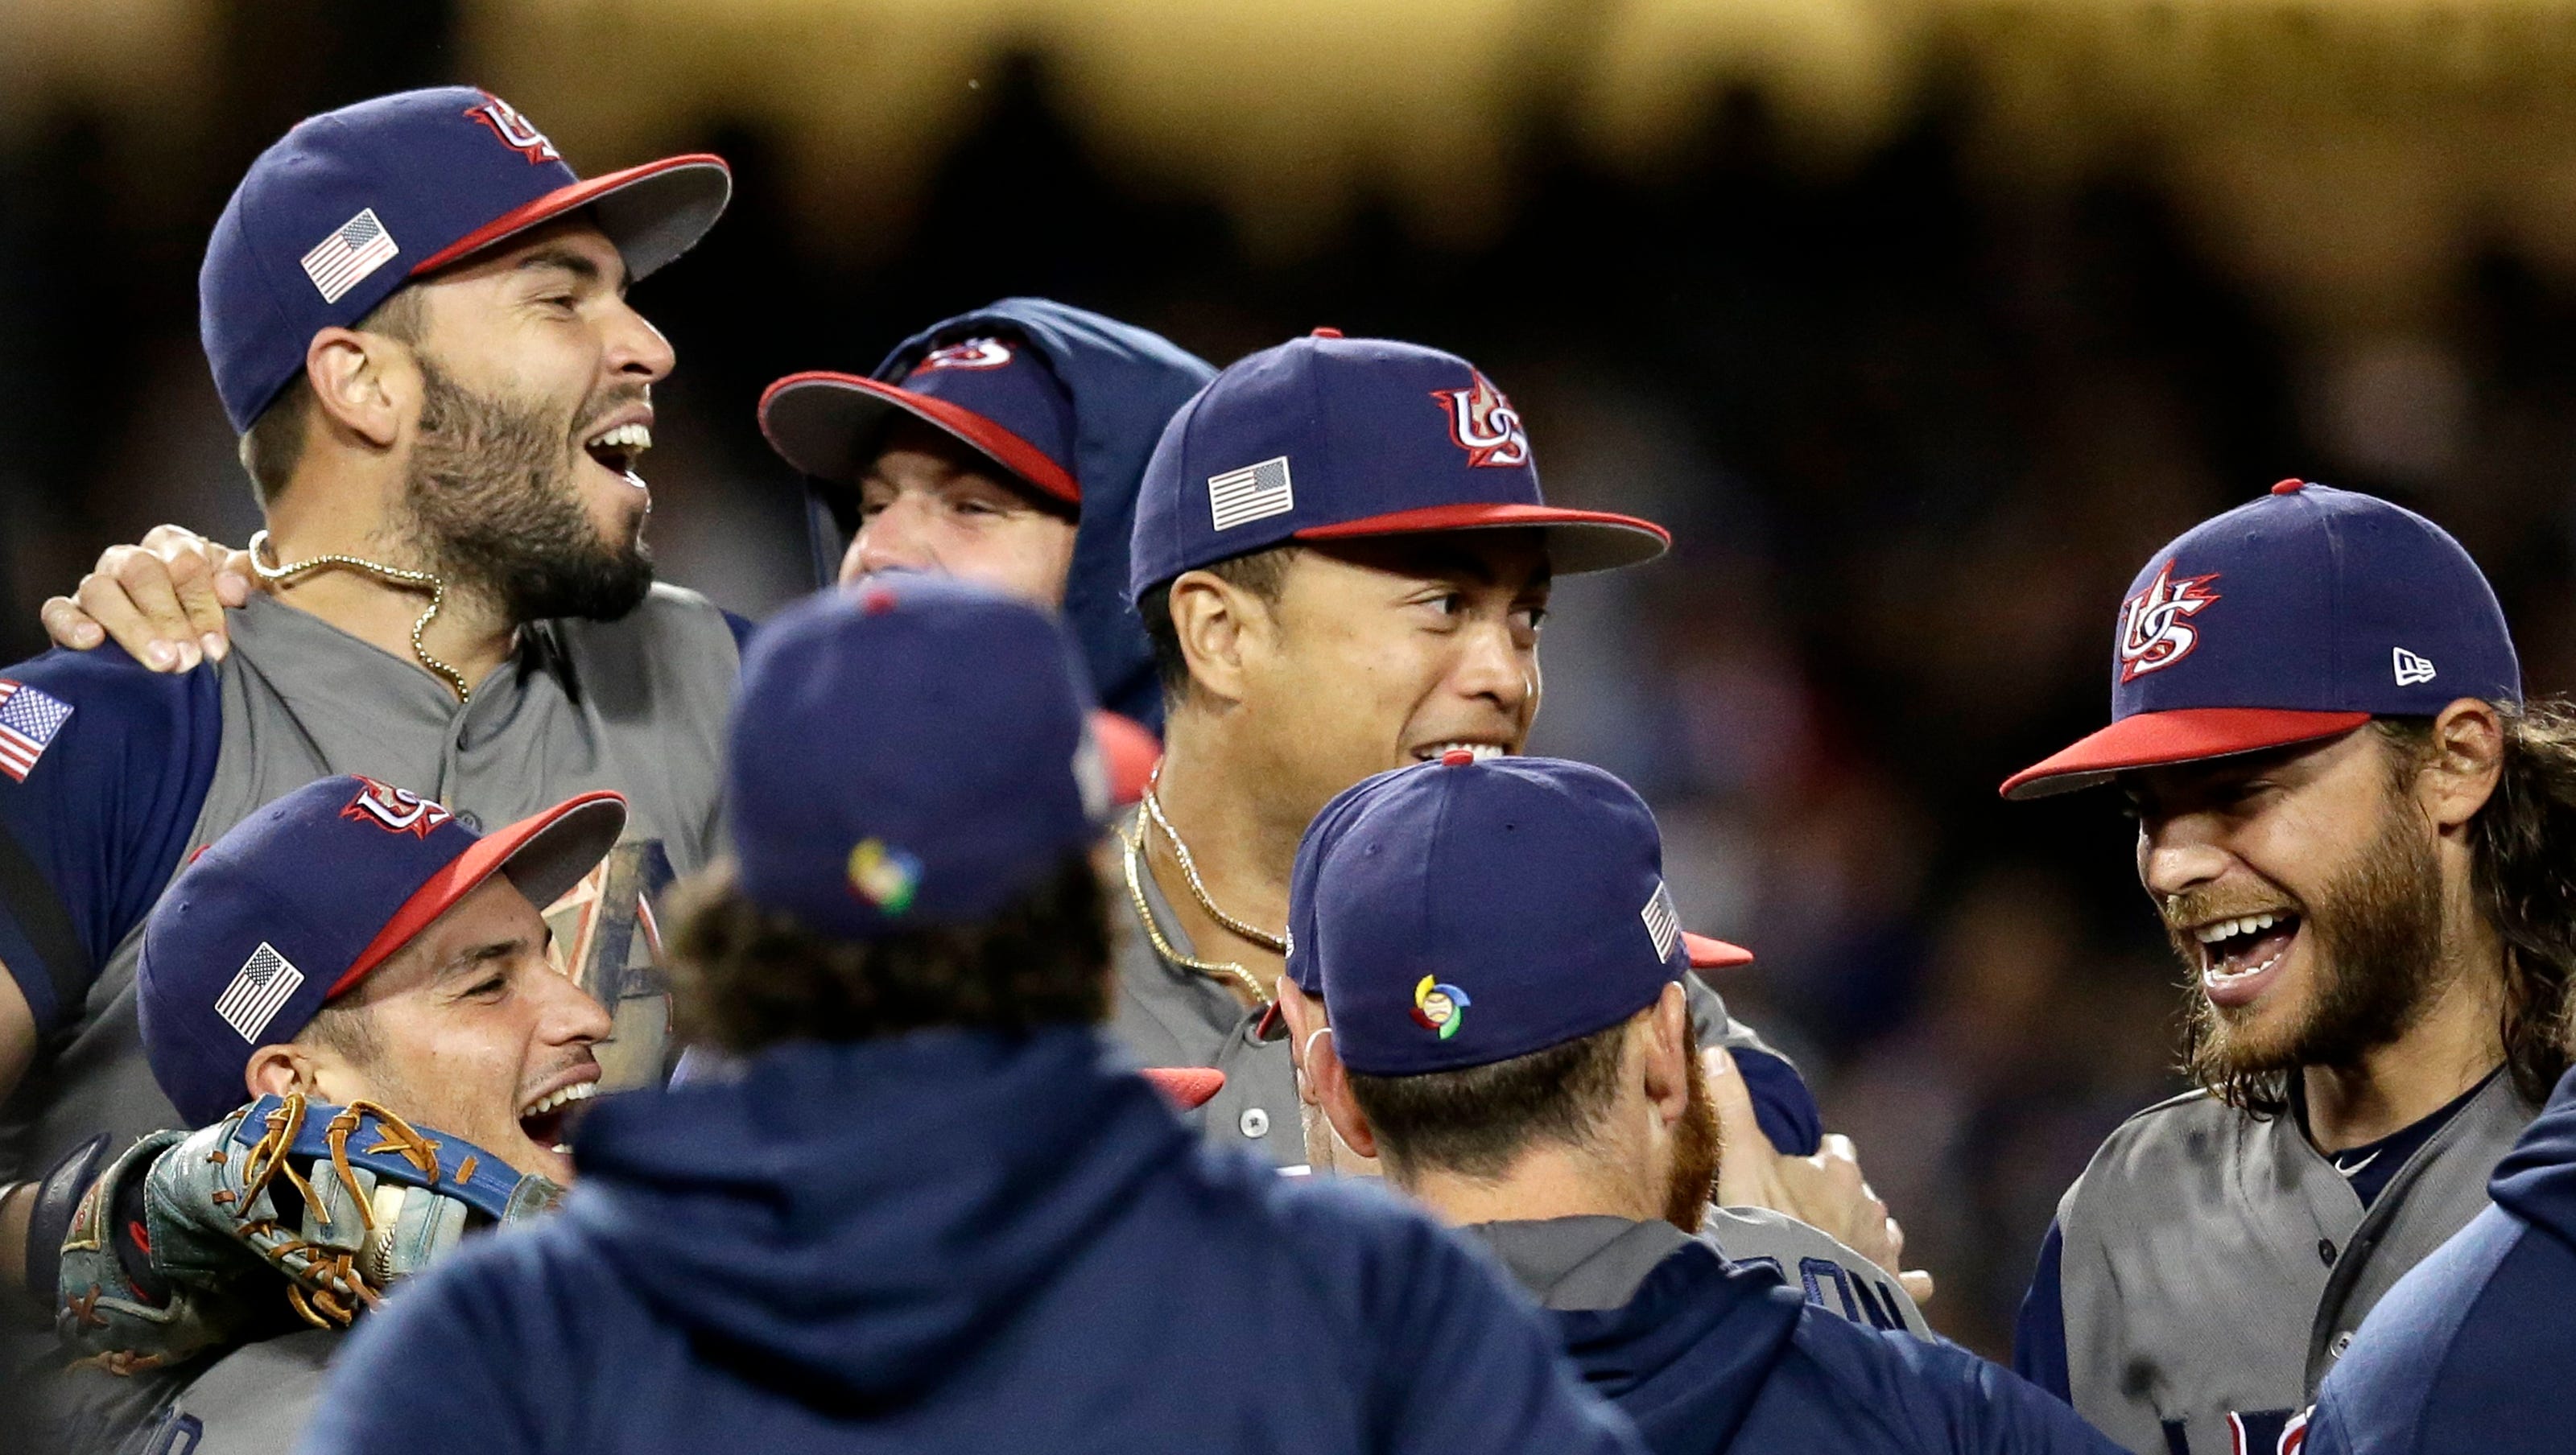 Style And Substance Team Usa Finds Itself In Winning World Baseball Classic